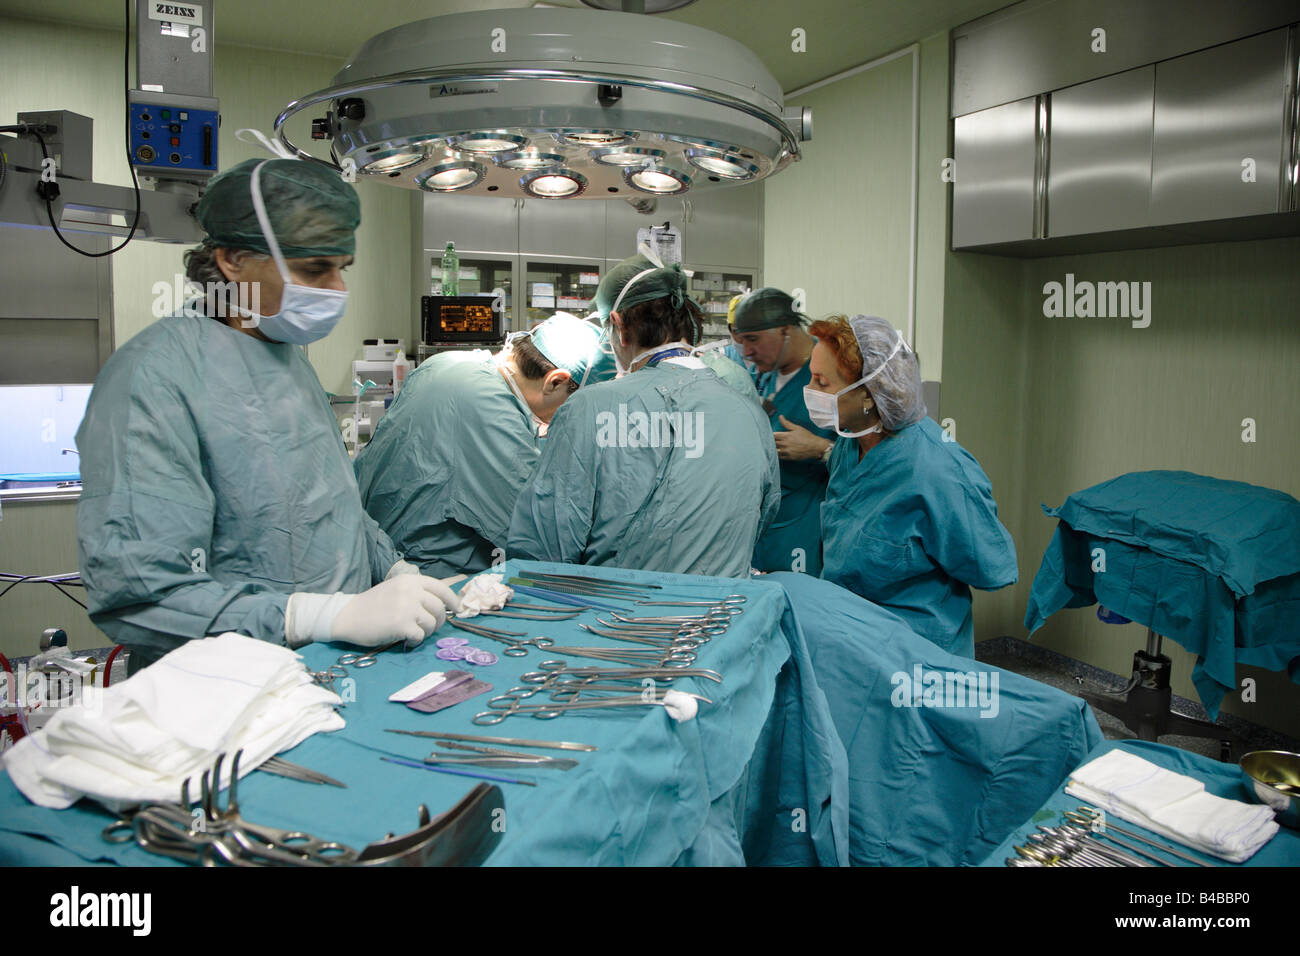 surgical team in operating theatre and instruments laid out ready. Stock Photo